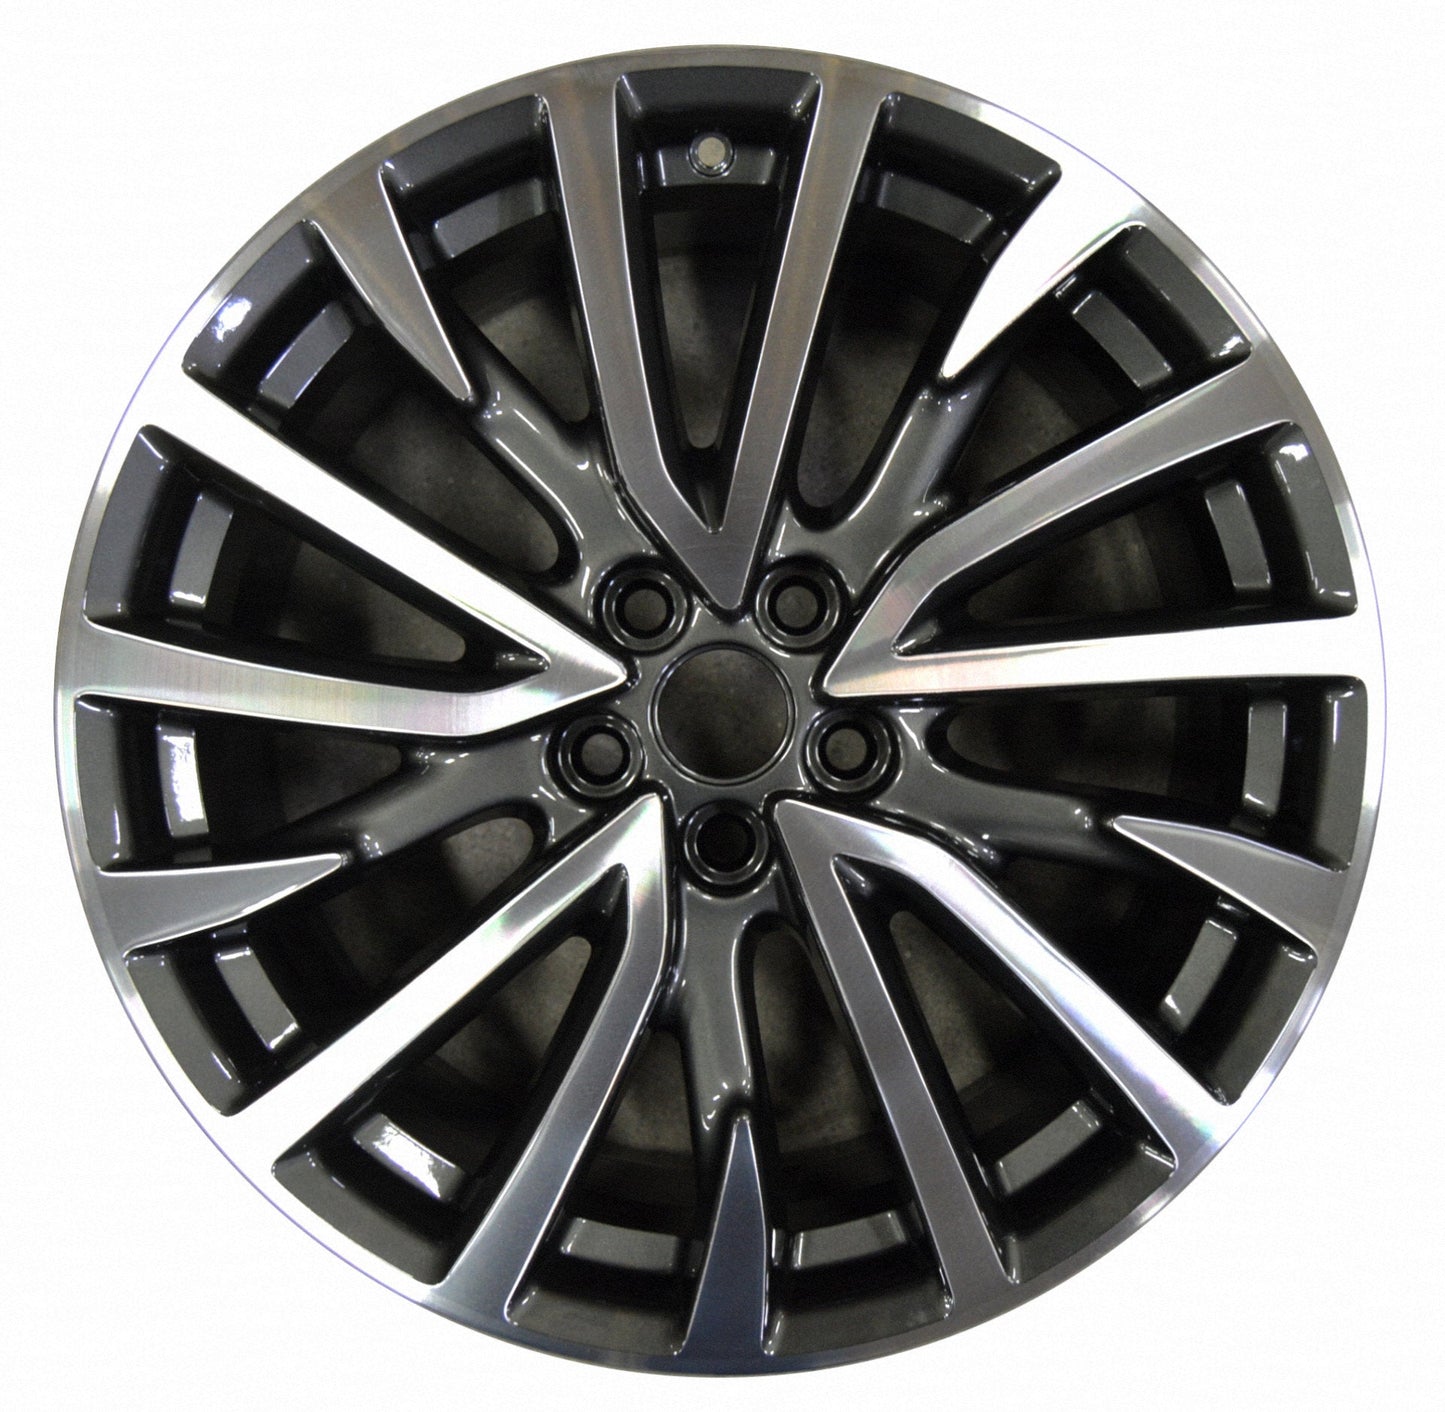 Lincoln Continental  2017, 2018, 2019, 2020 Factory OEM Car Wheel Size 19x8 Alloy WAO.10090.PB01LC197.MA